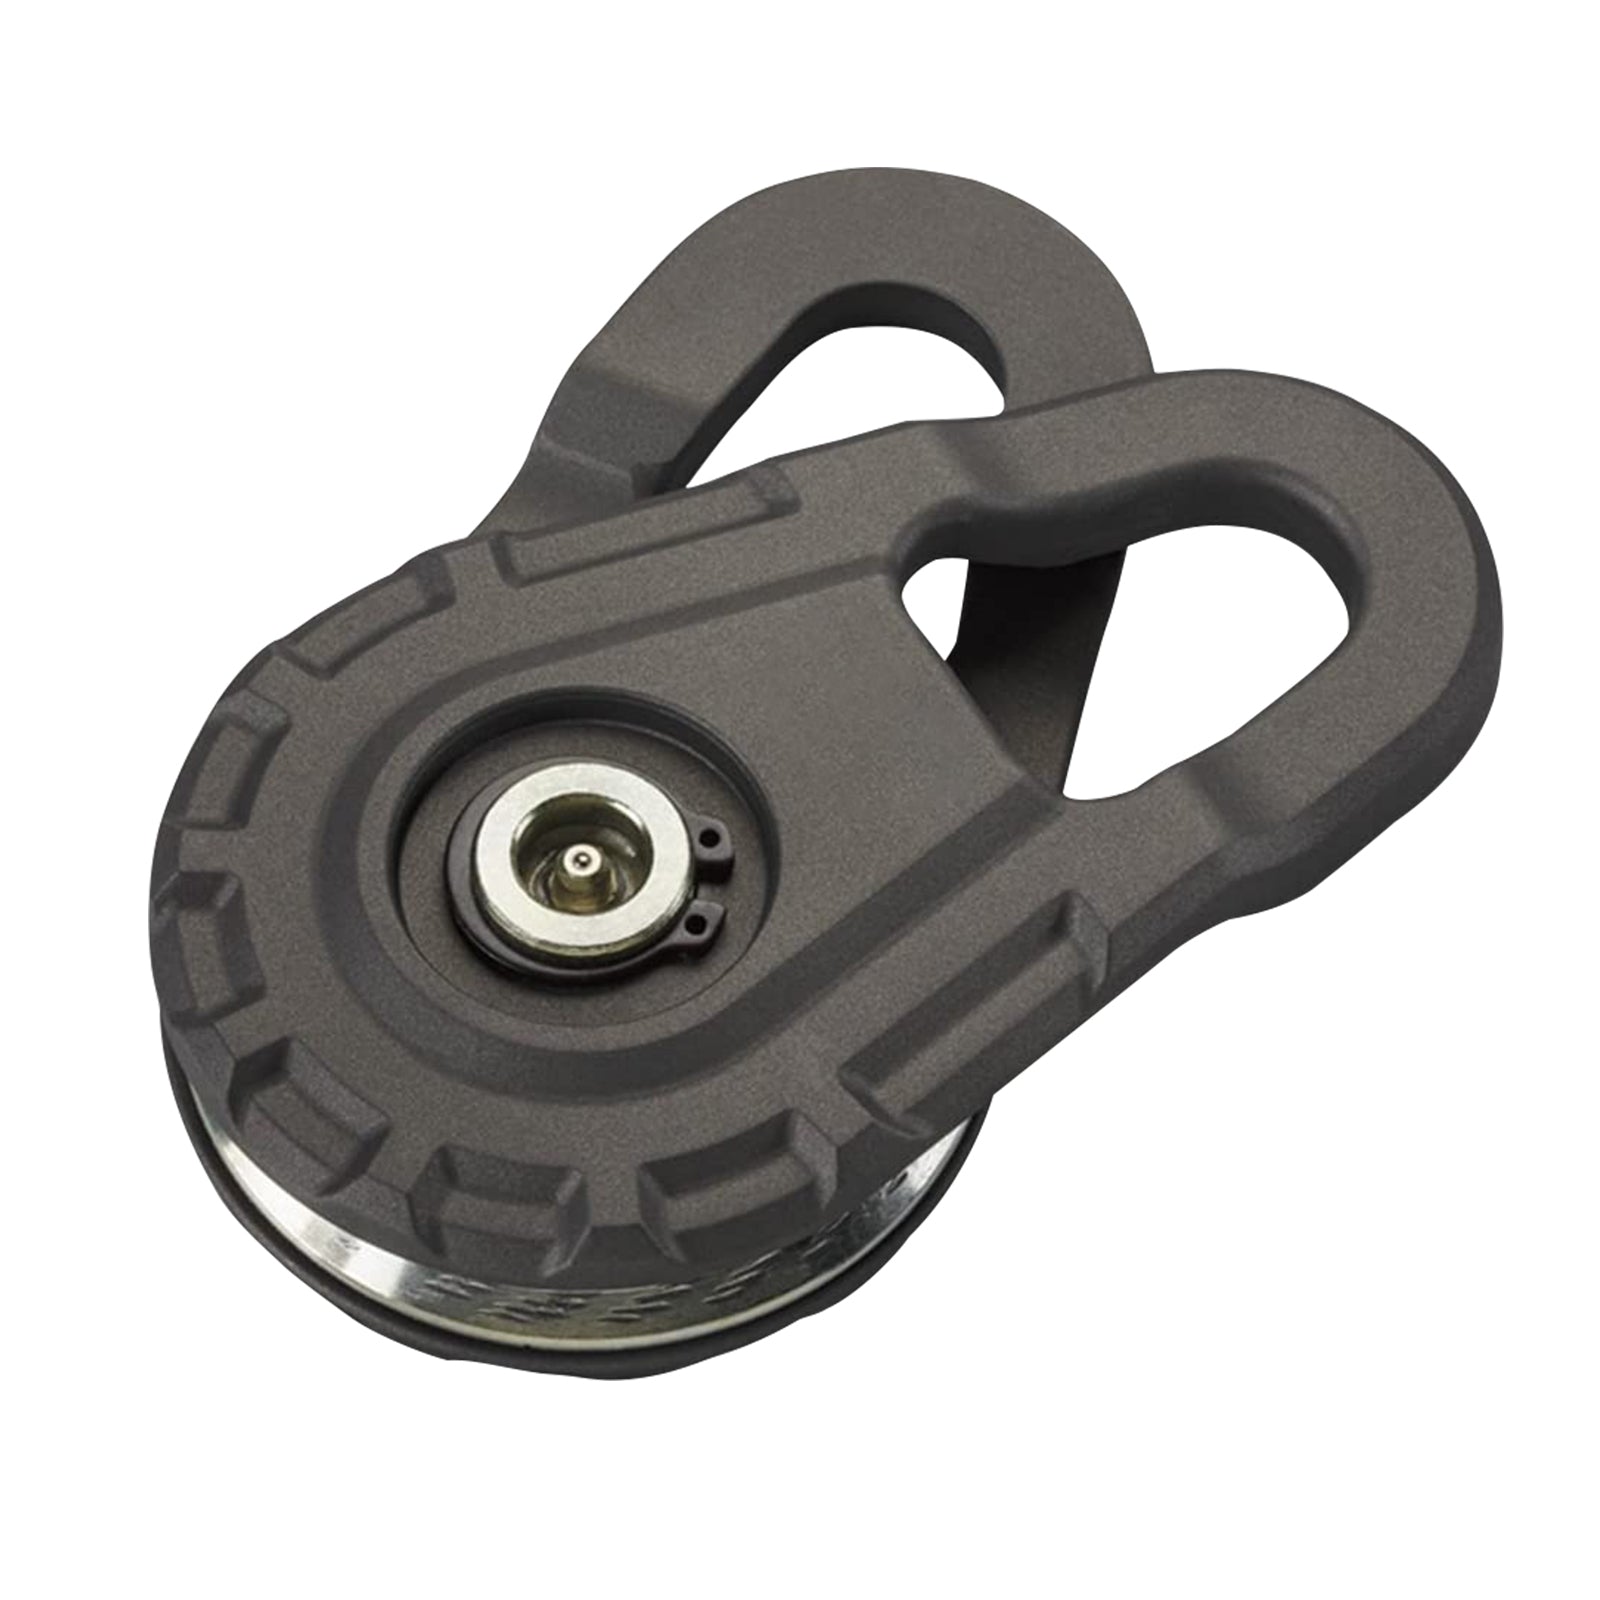 OPENROAD Heavy Duty 10 Ton Snatch Block Capacity Recovery Winch Pulley (20000LB)New  openroad4wd.com   